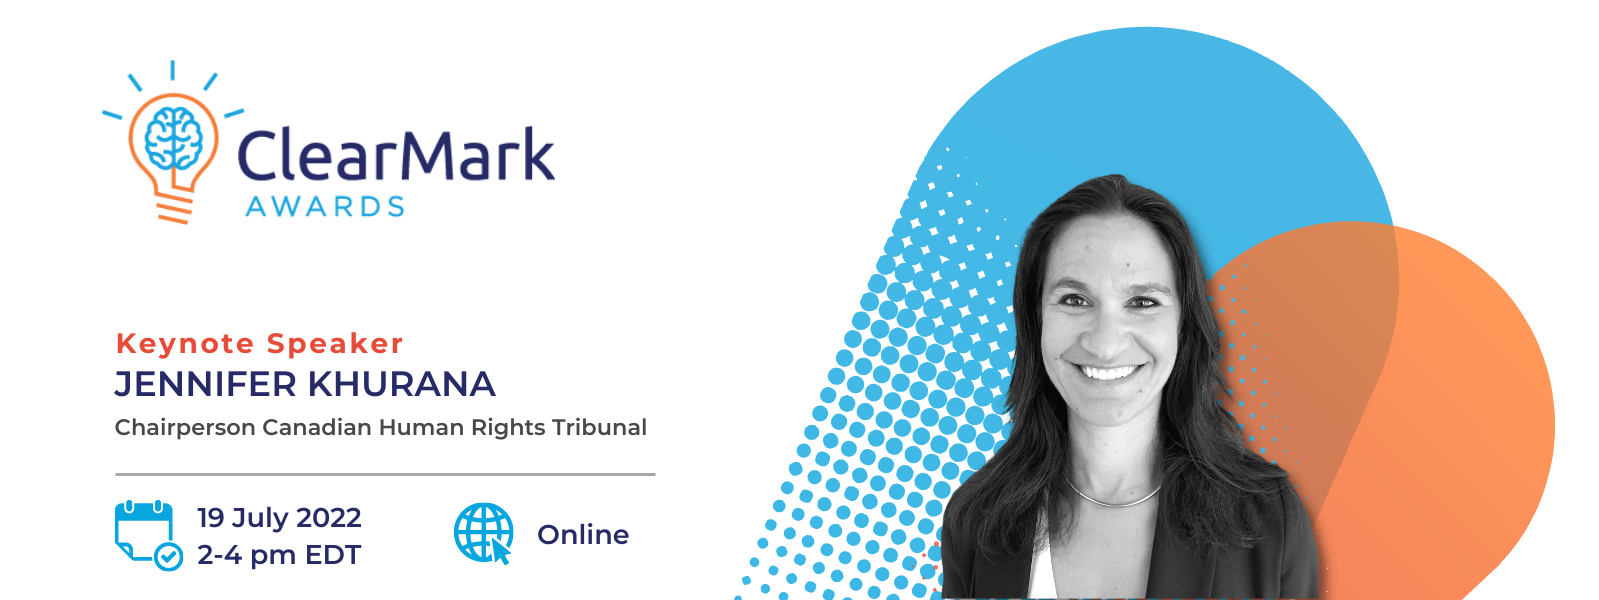 Information about the 2022 ClearMark awards to be held online July 19th, 2022 from 2-4pm EDT. Image of our keynote speaker Jennifer Khurana, Chairperson of Canada's Human Rights Tribunal